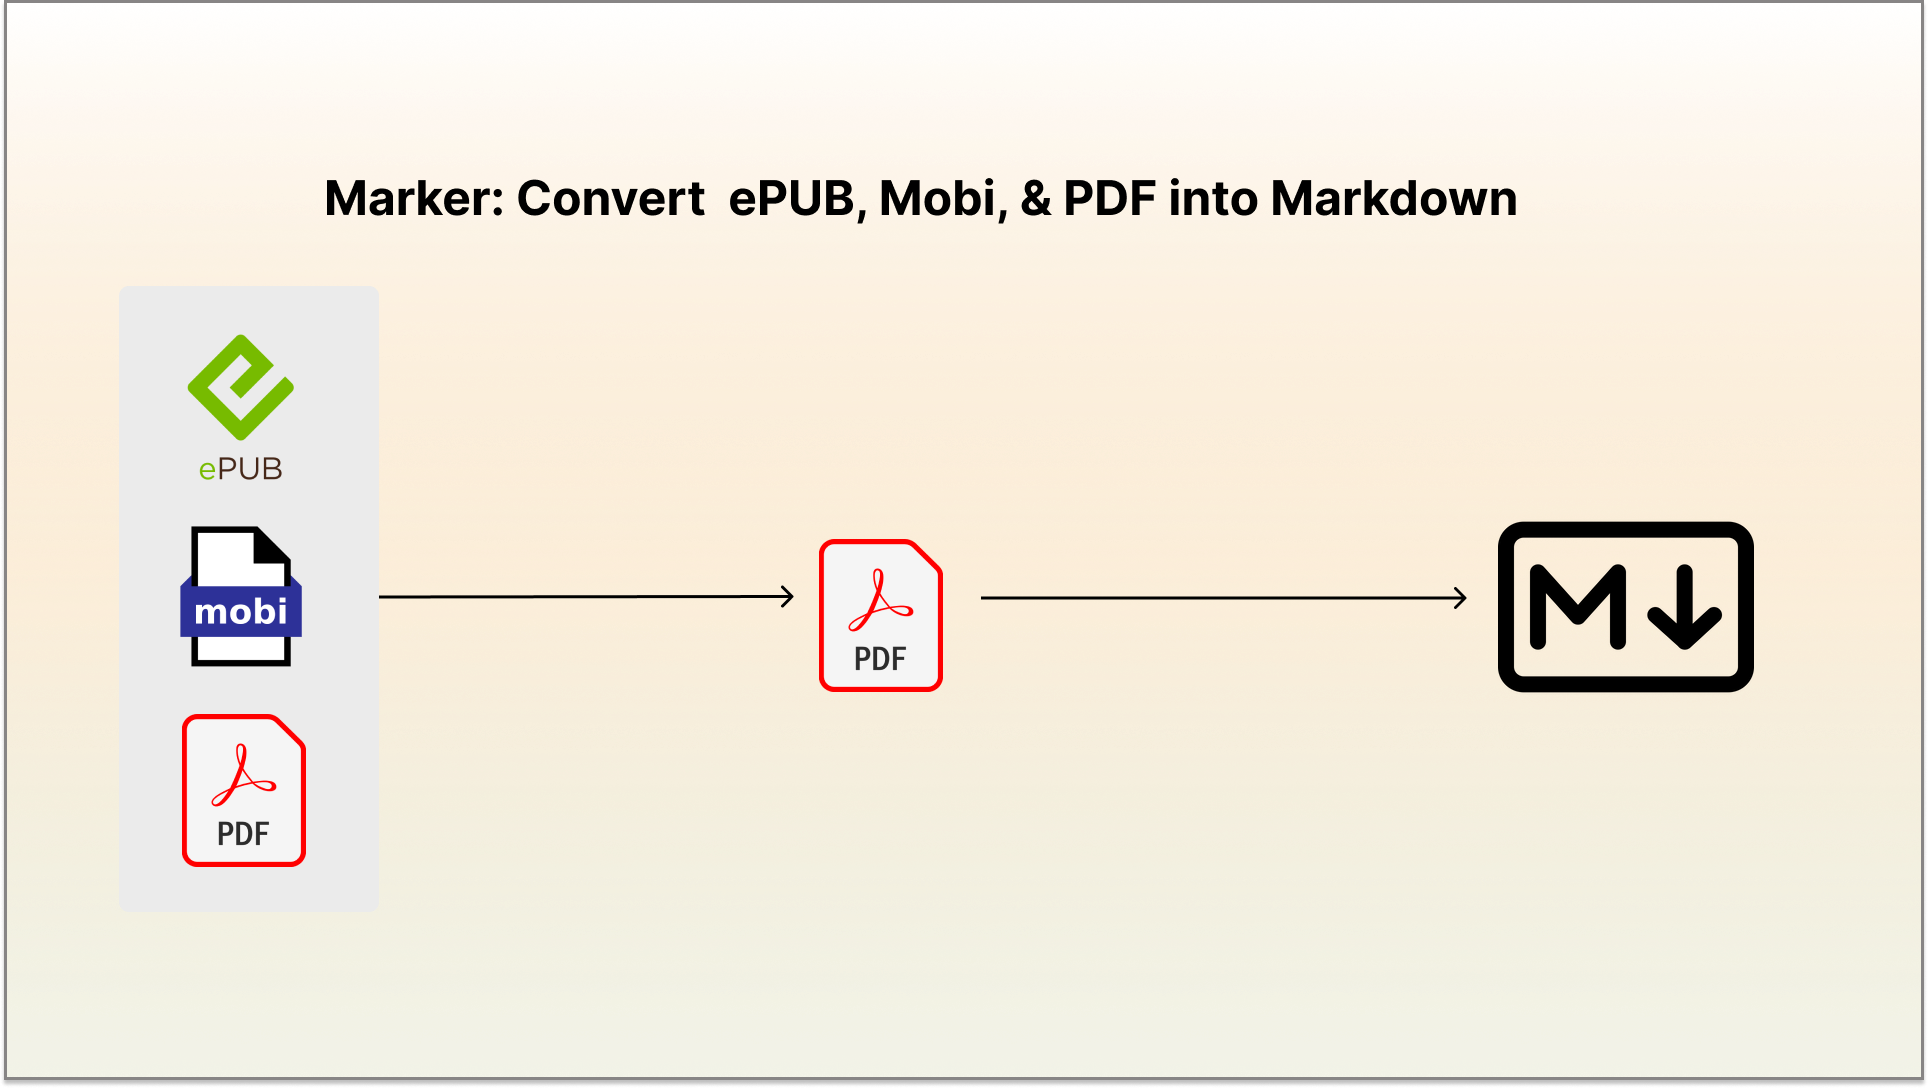 Marker: A New Python-based Library that Converts PDF to Markdown Quickly and Accurately